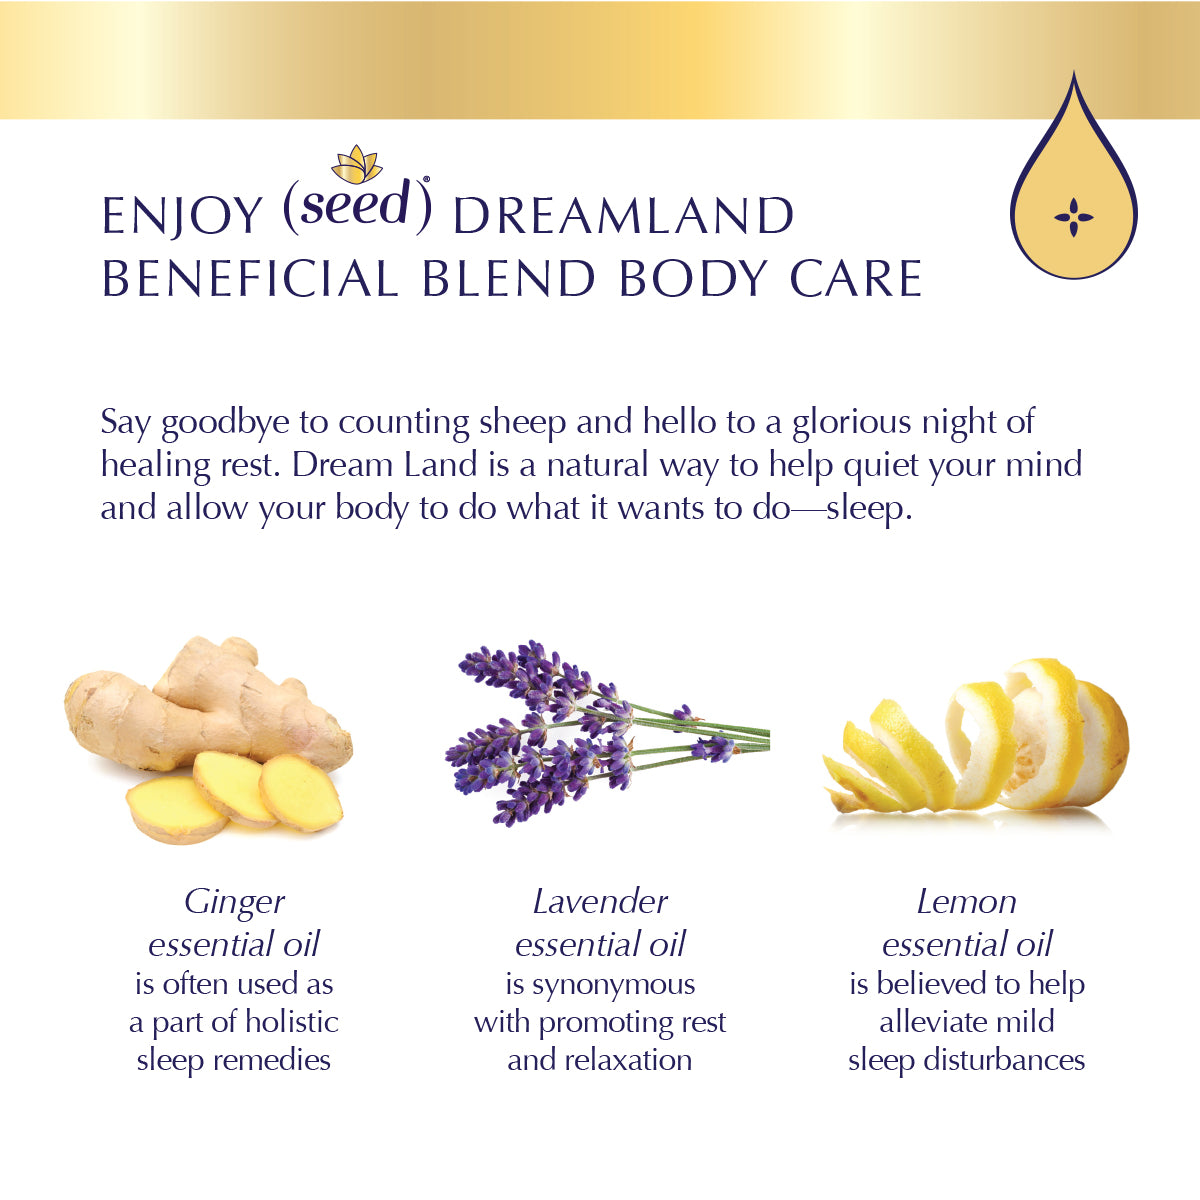 Seed Dream Land Blend Body Care with lemon, lavender, and ginger essential oils